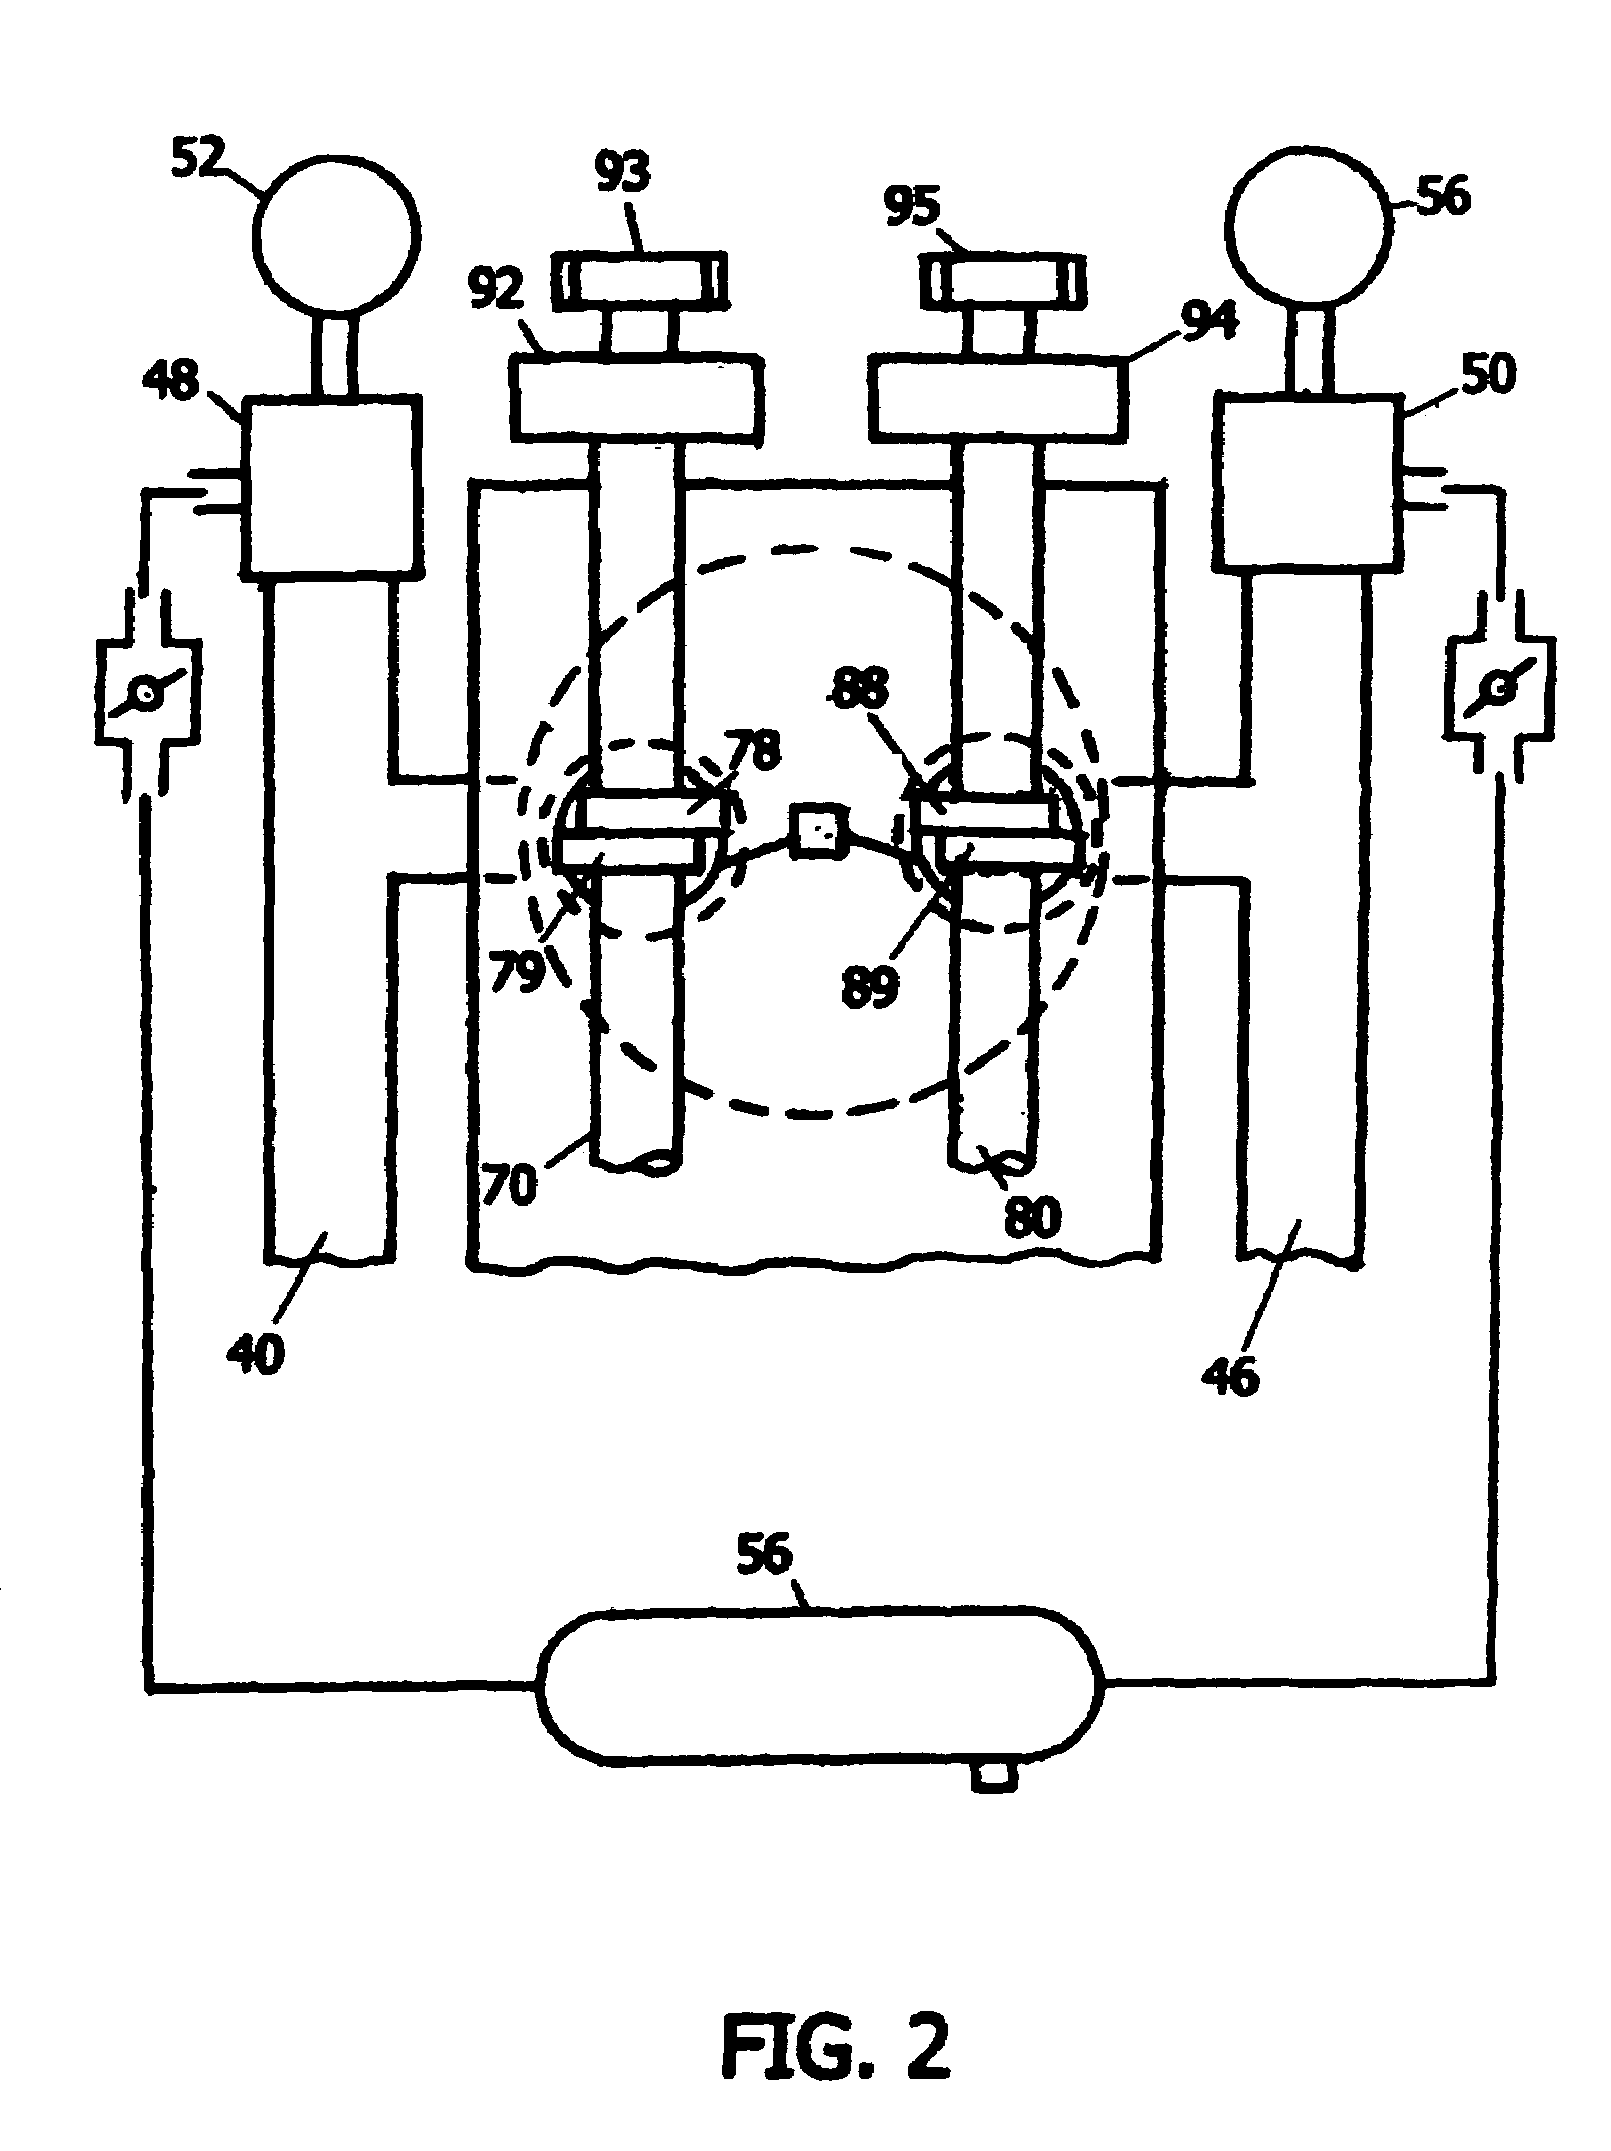 Operating an air-hybrid vehicle with camshaft-driven engine valves